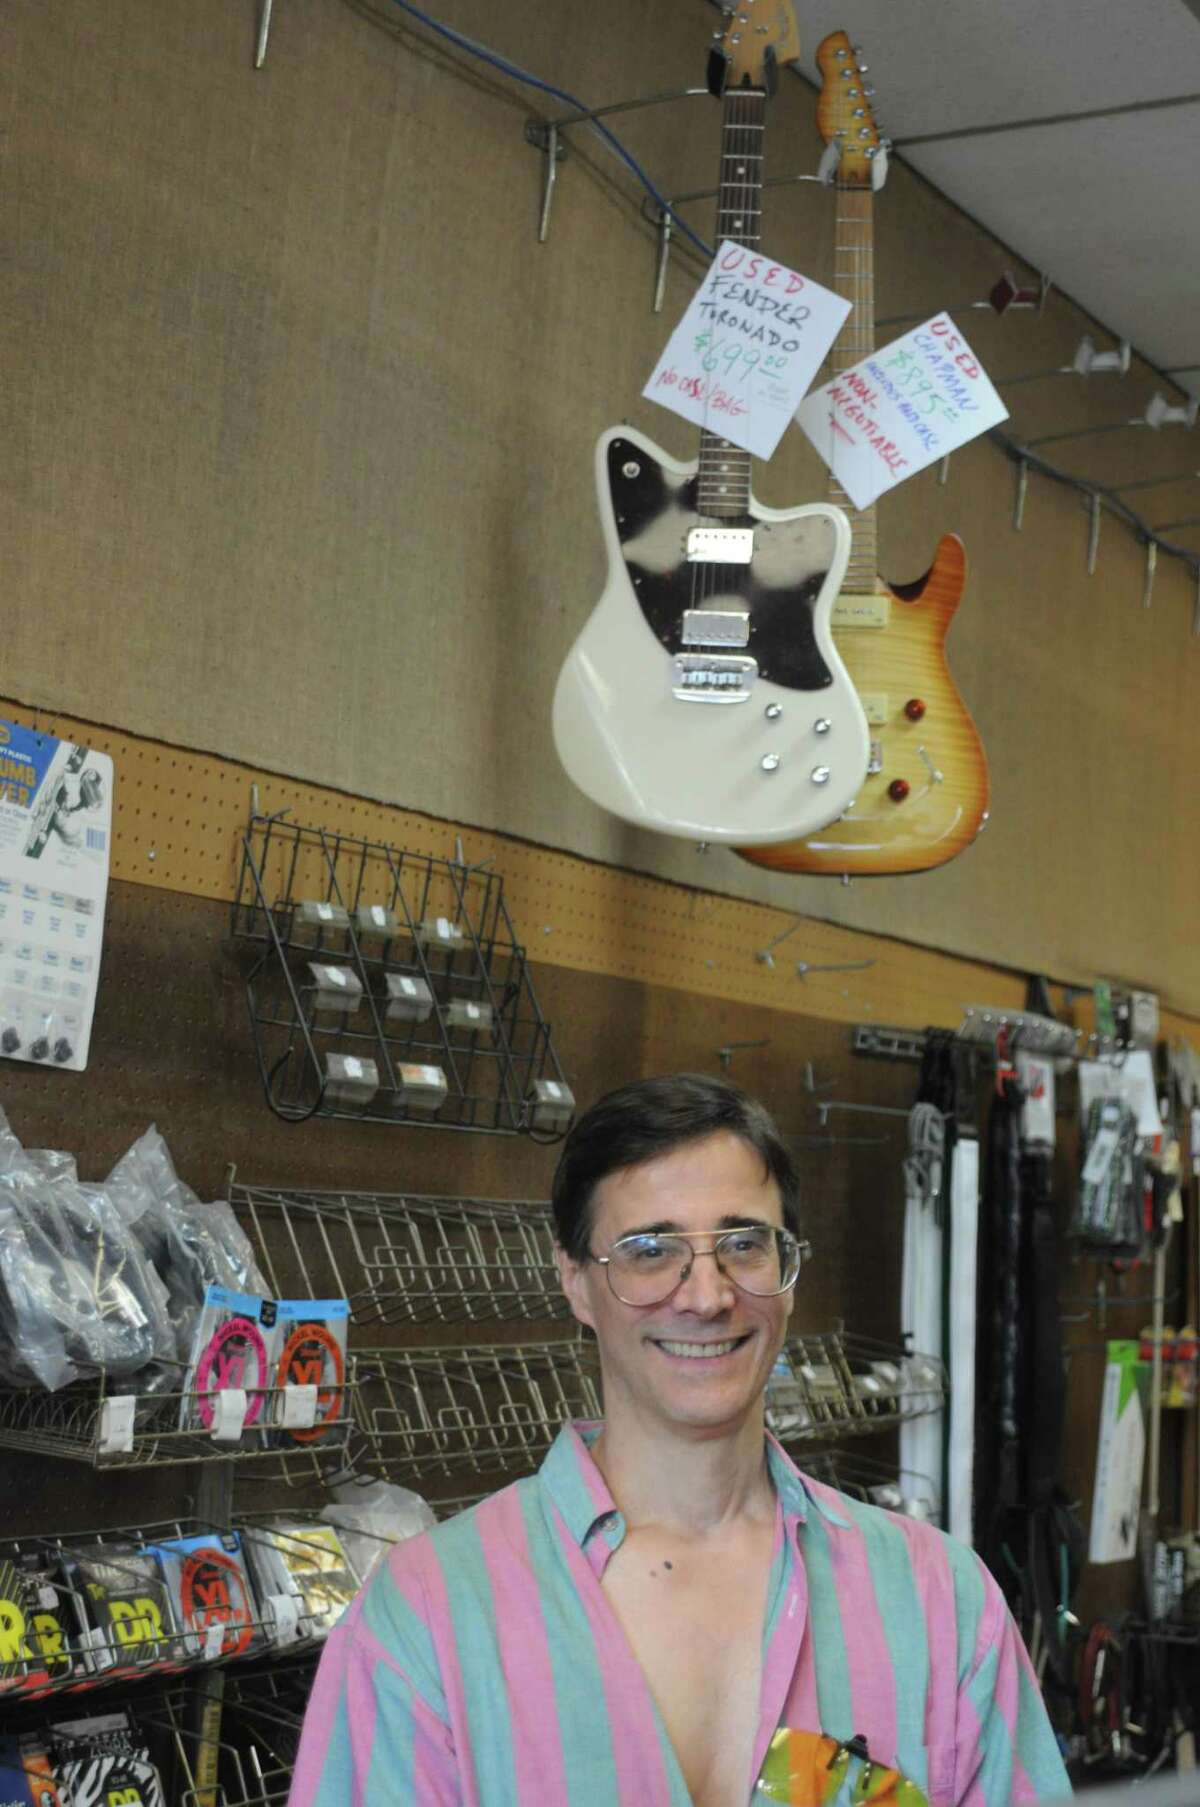 Chris Pike has owned Ridgefield Music since 1994. He closed the Governor Street business, which dates back to 1970, on Wednesday, July 31.